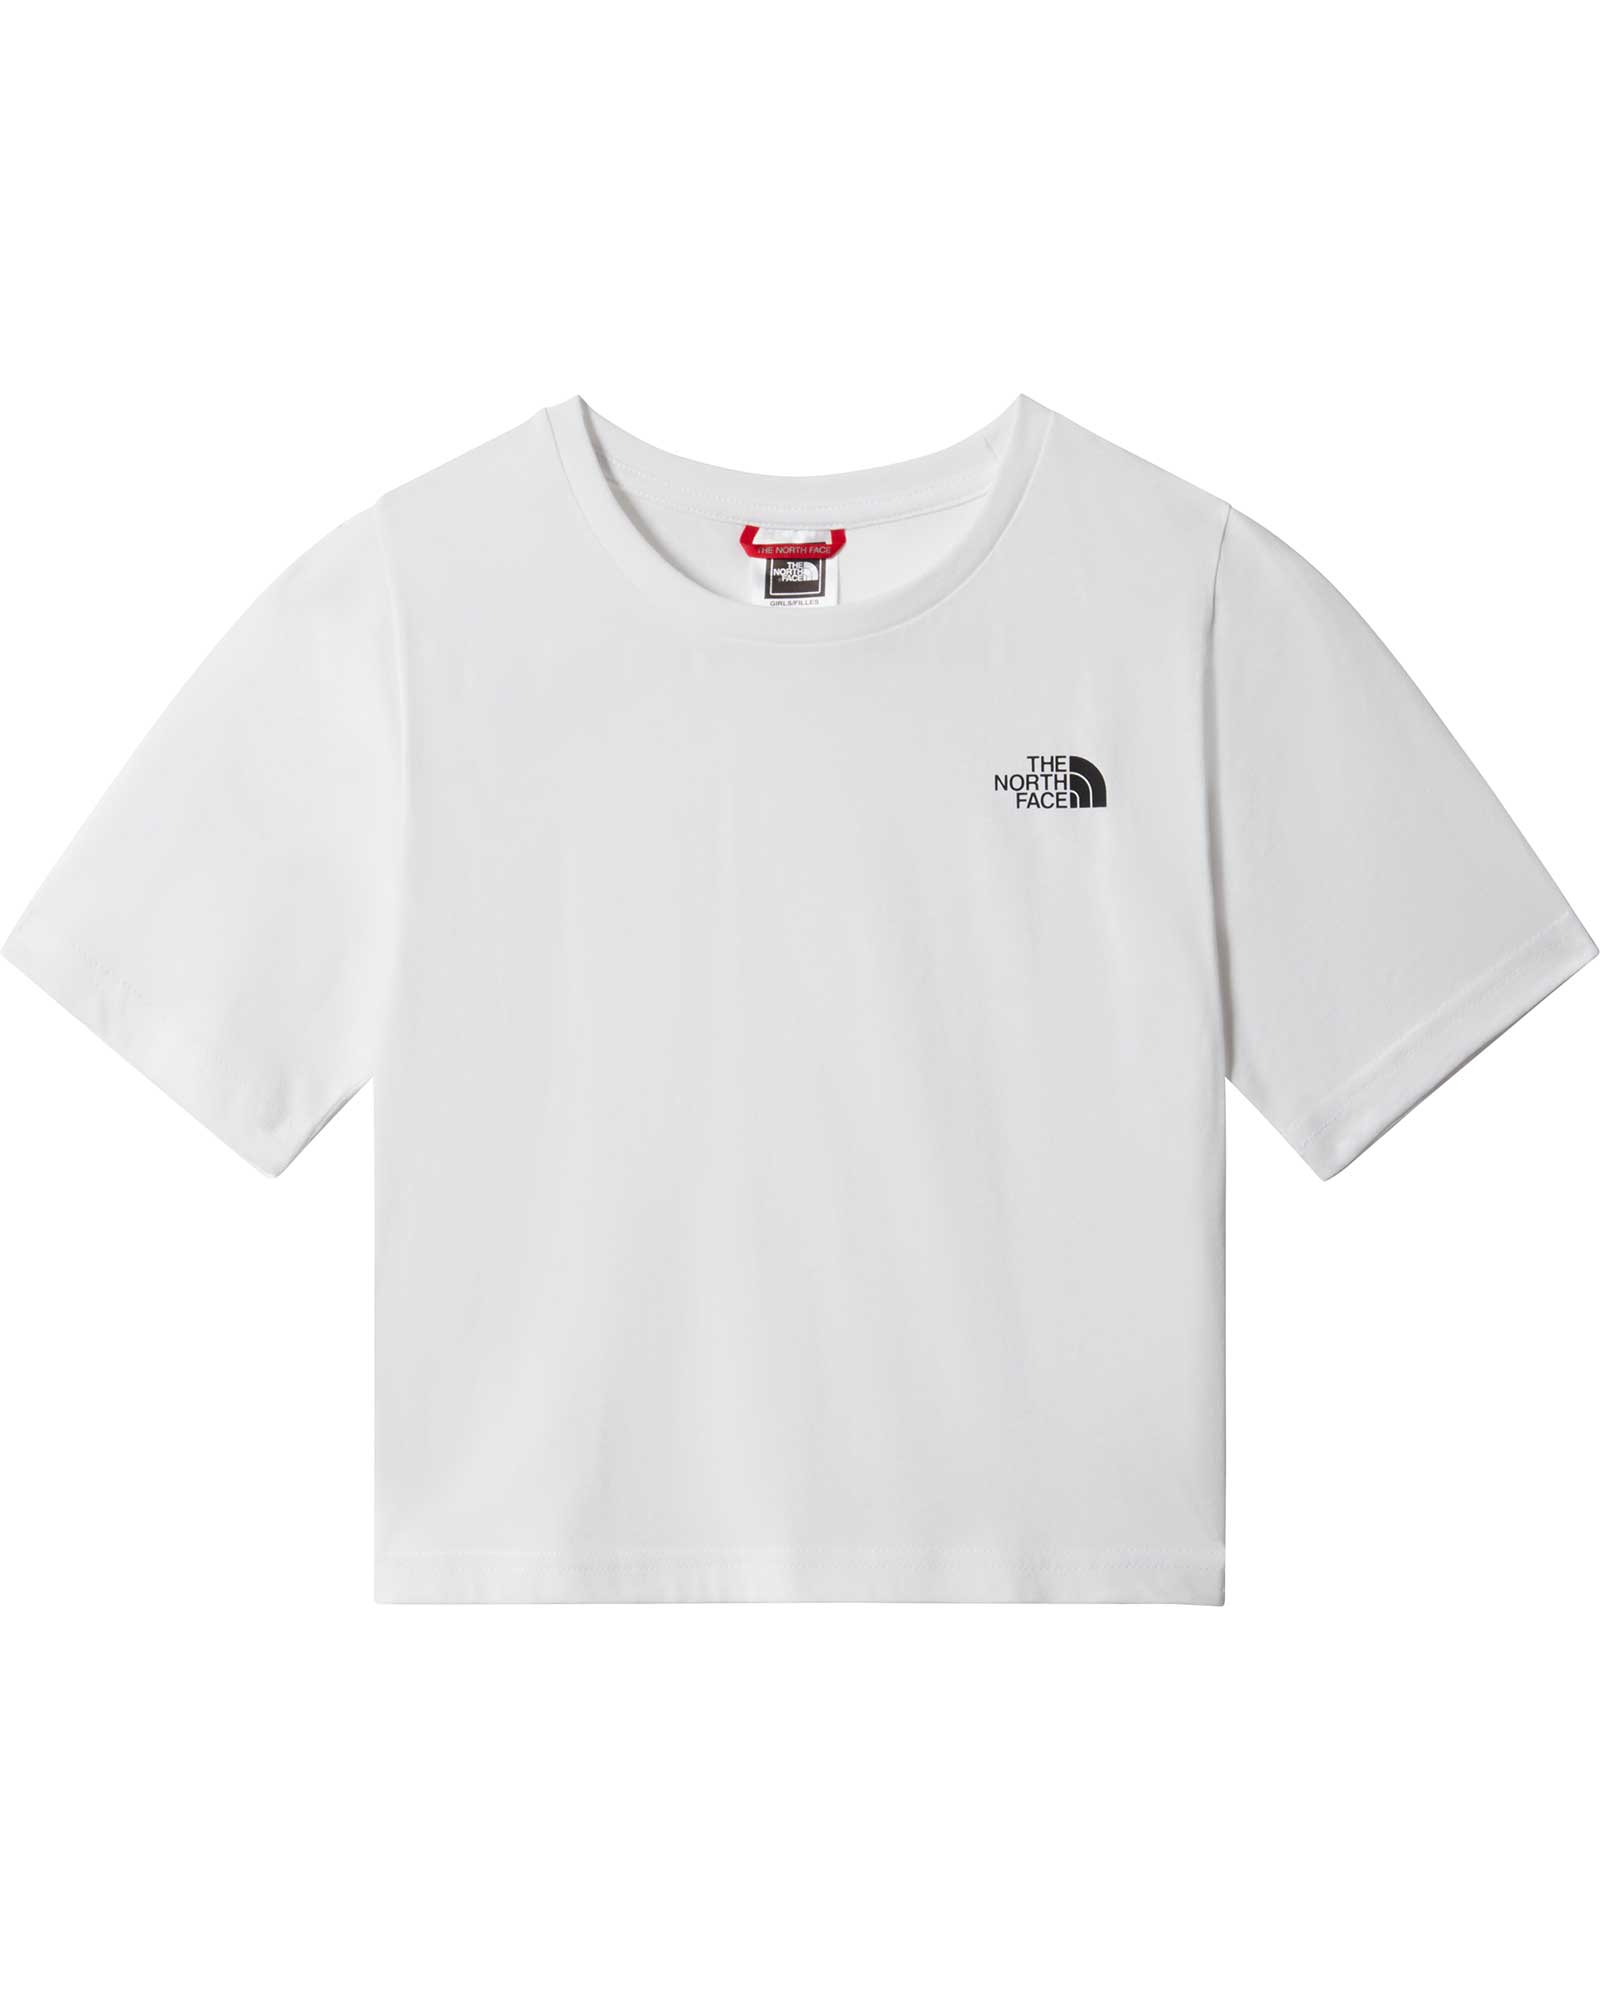 Product image of The North Face Simple Dome Girls' Cropped T-Shirt